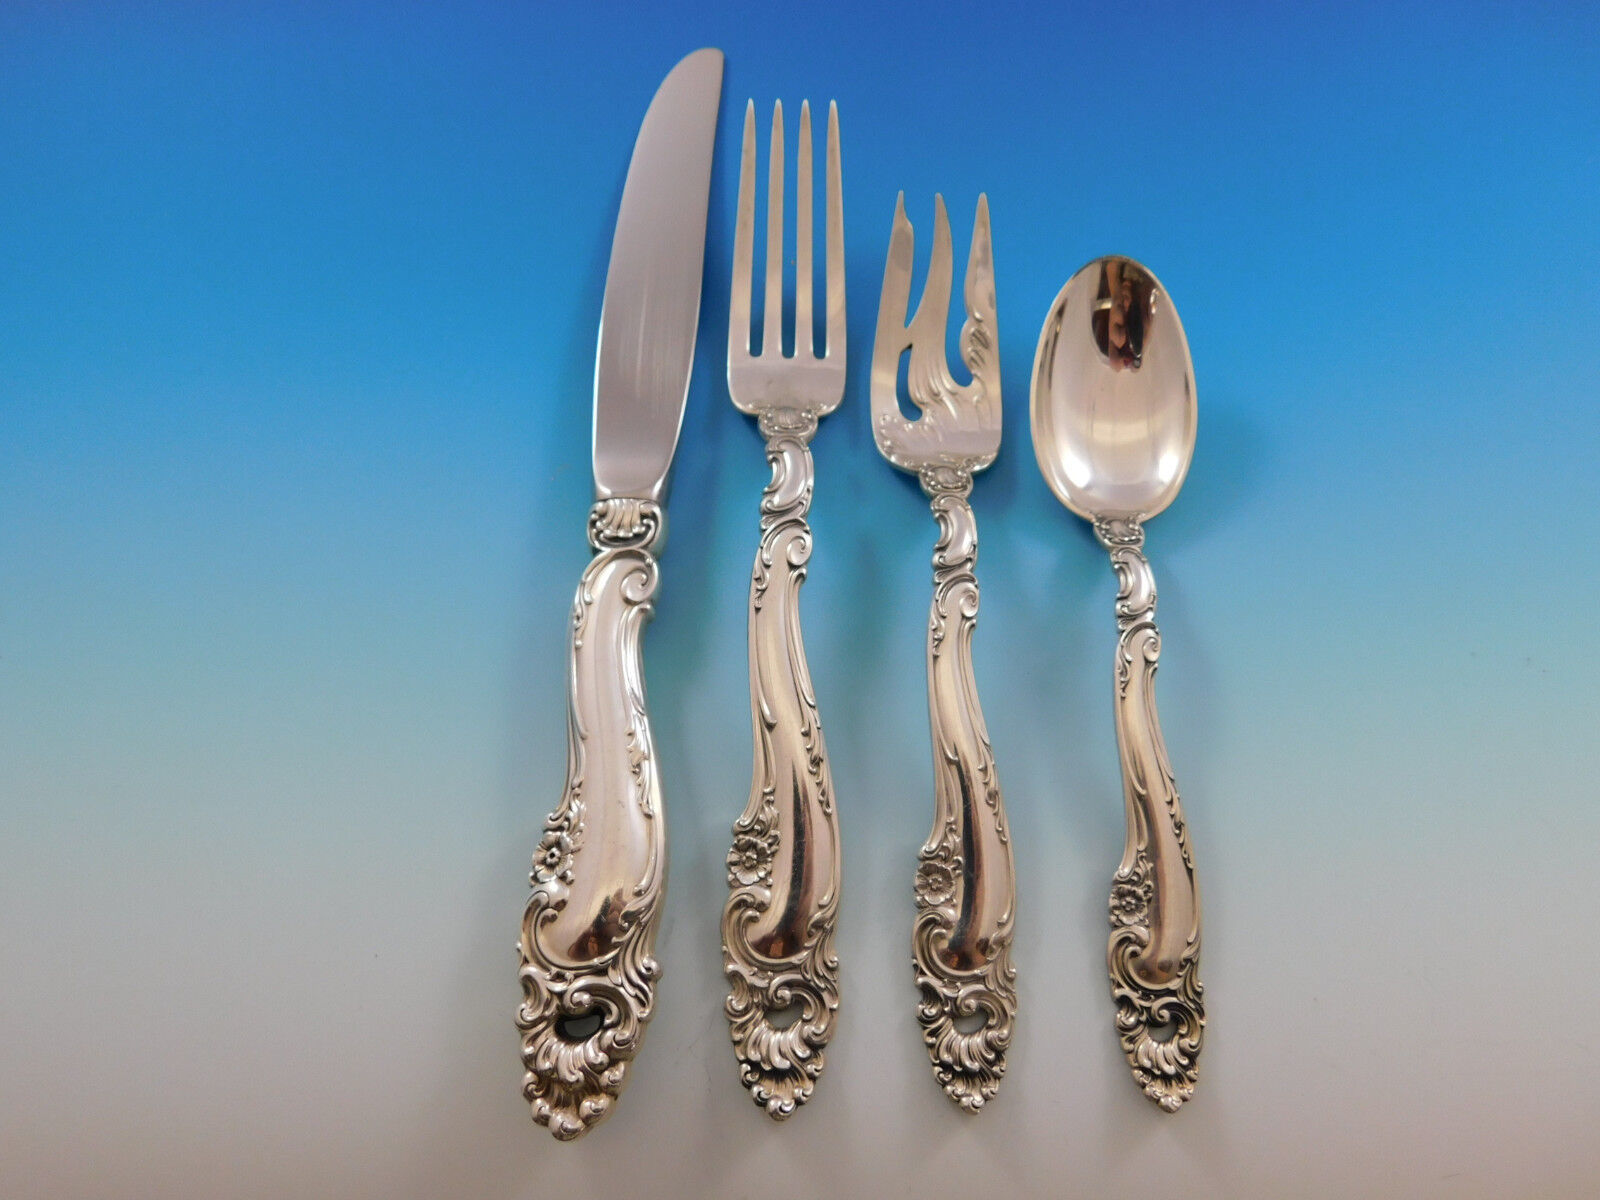 Primary image for Decor by Gorham Sterling Silver Flatware Set for 8 Service 32 pieces